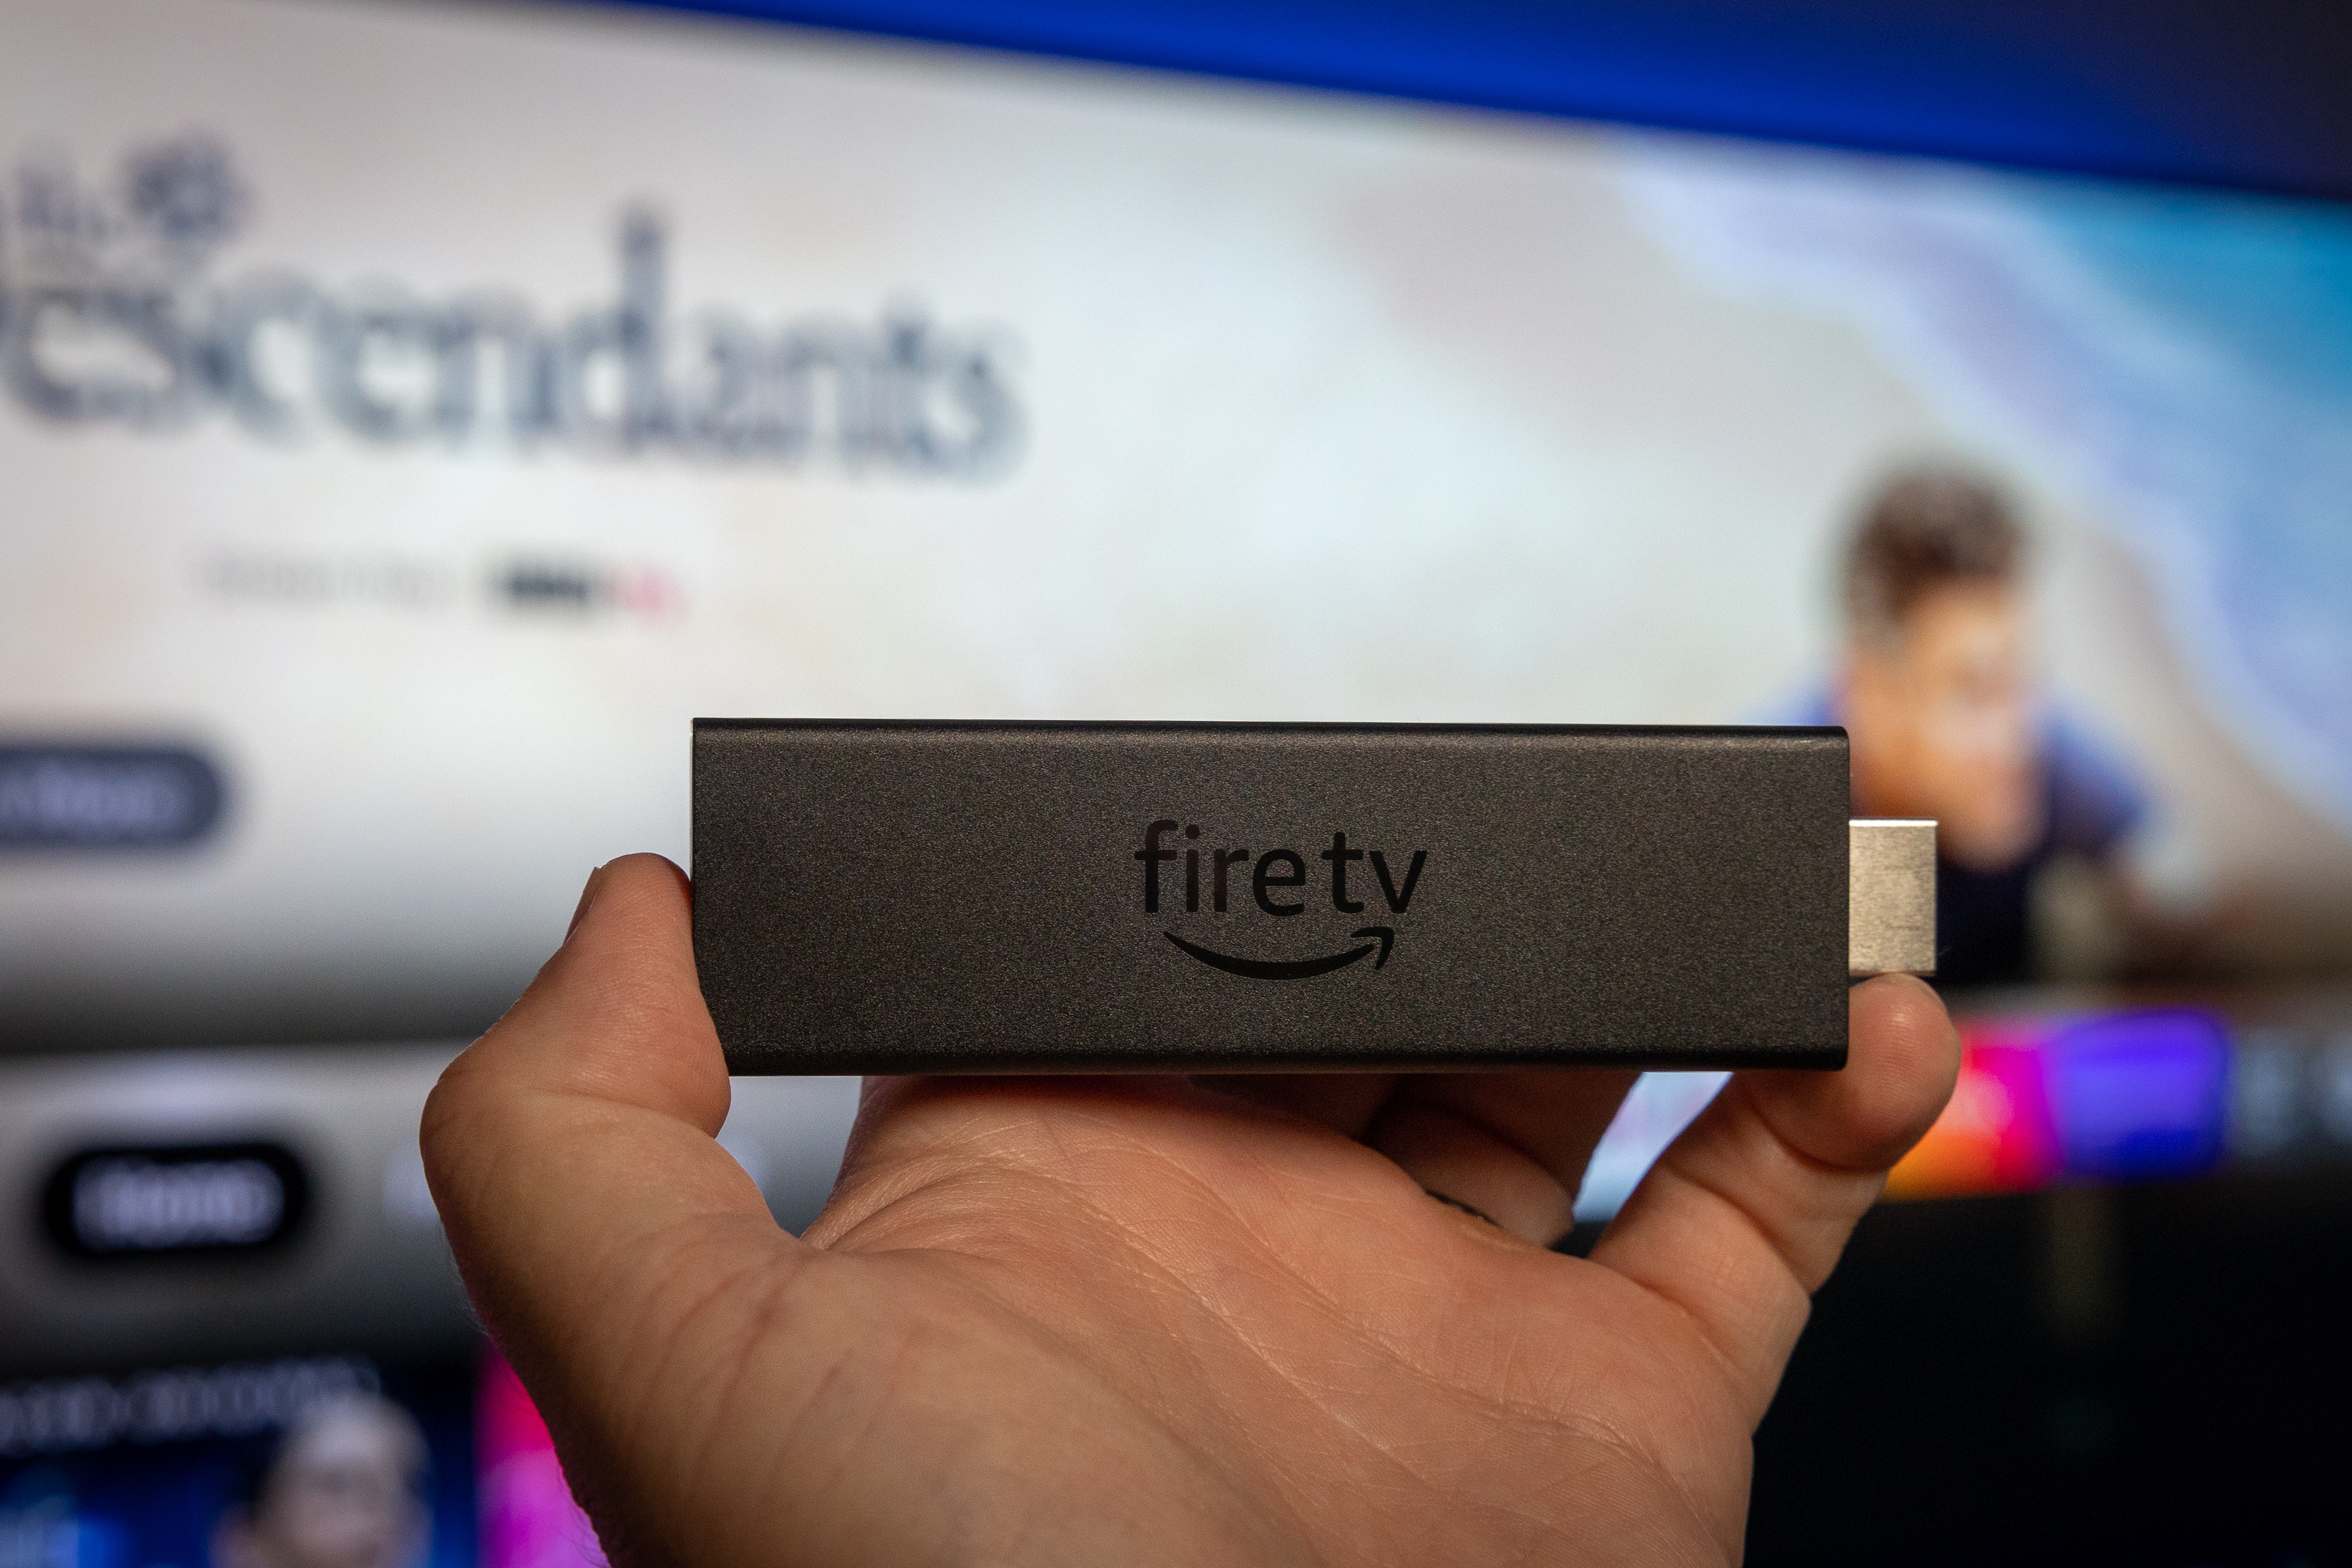 Fire TV Stick users are just realizing entering code